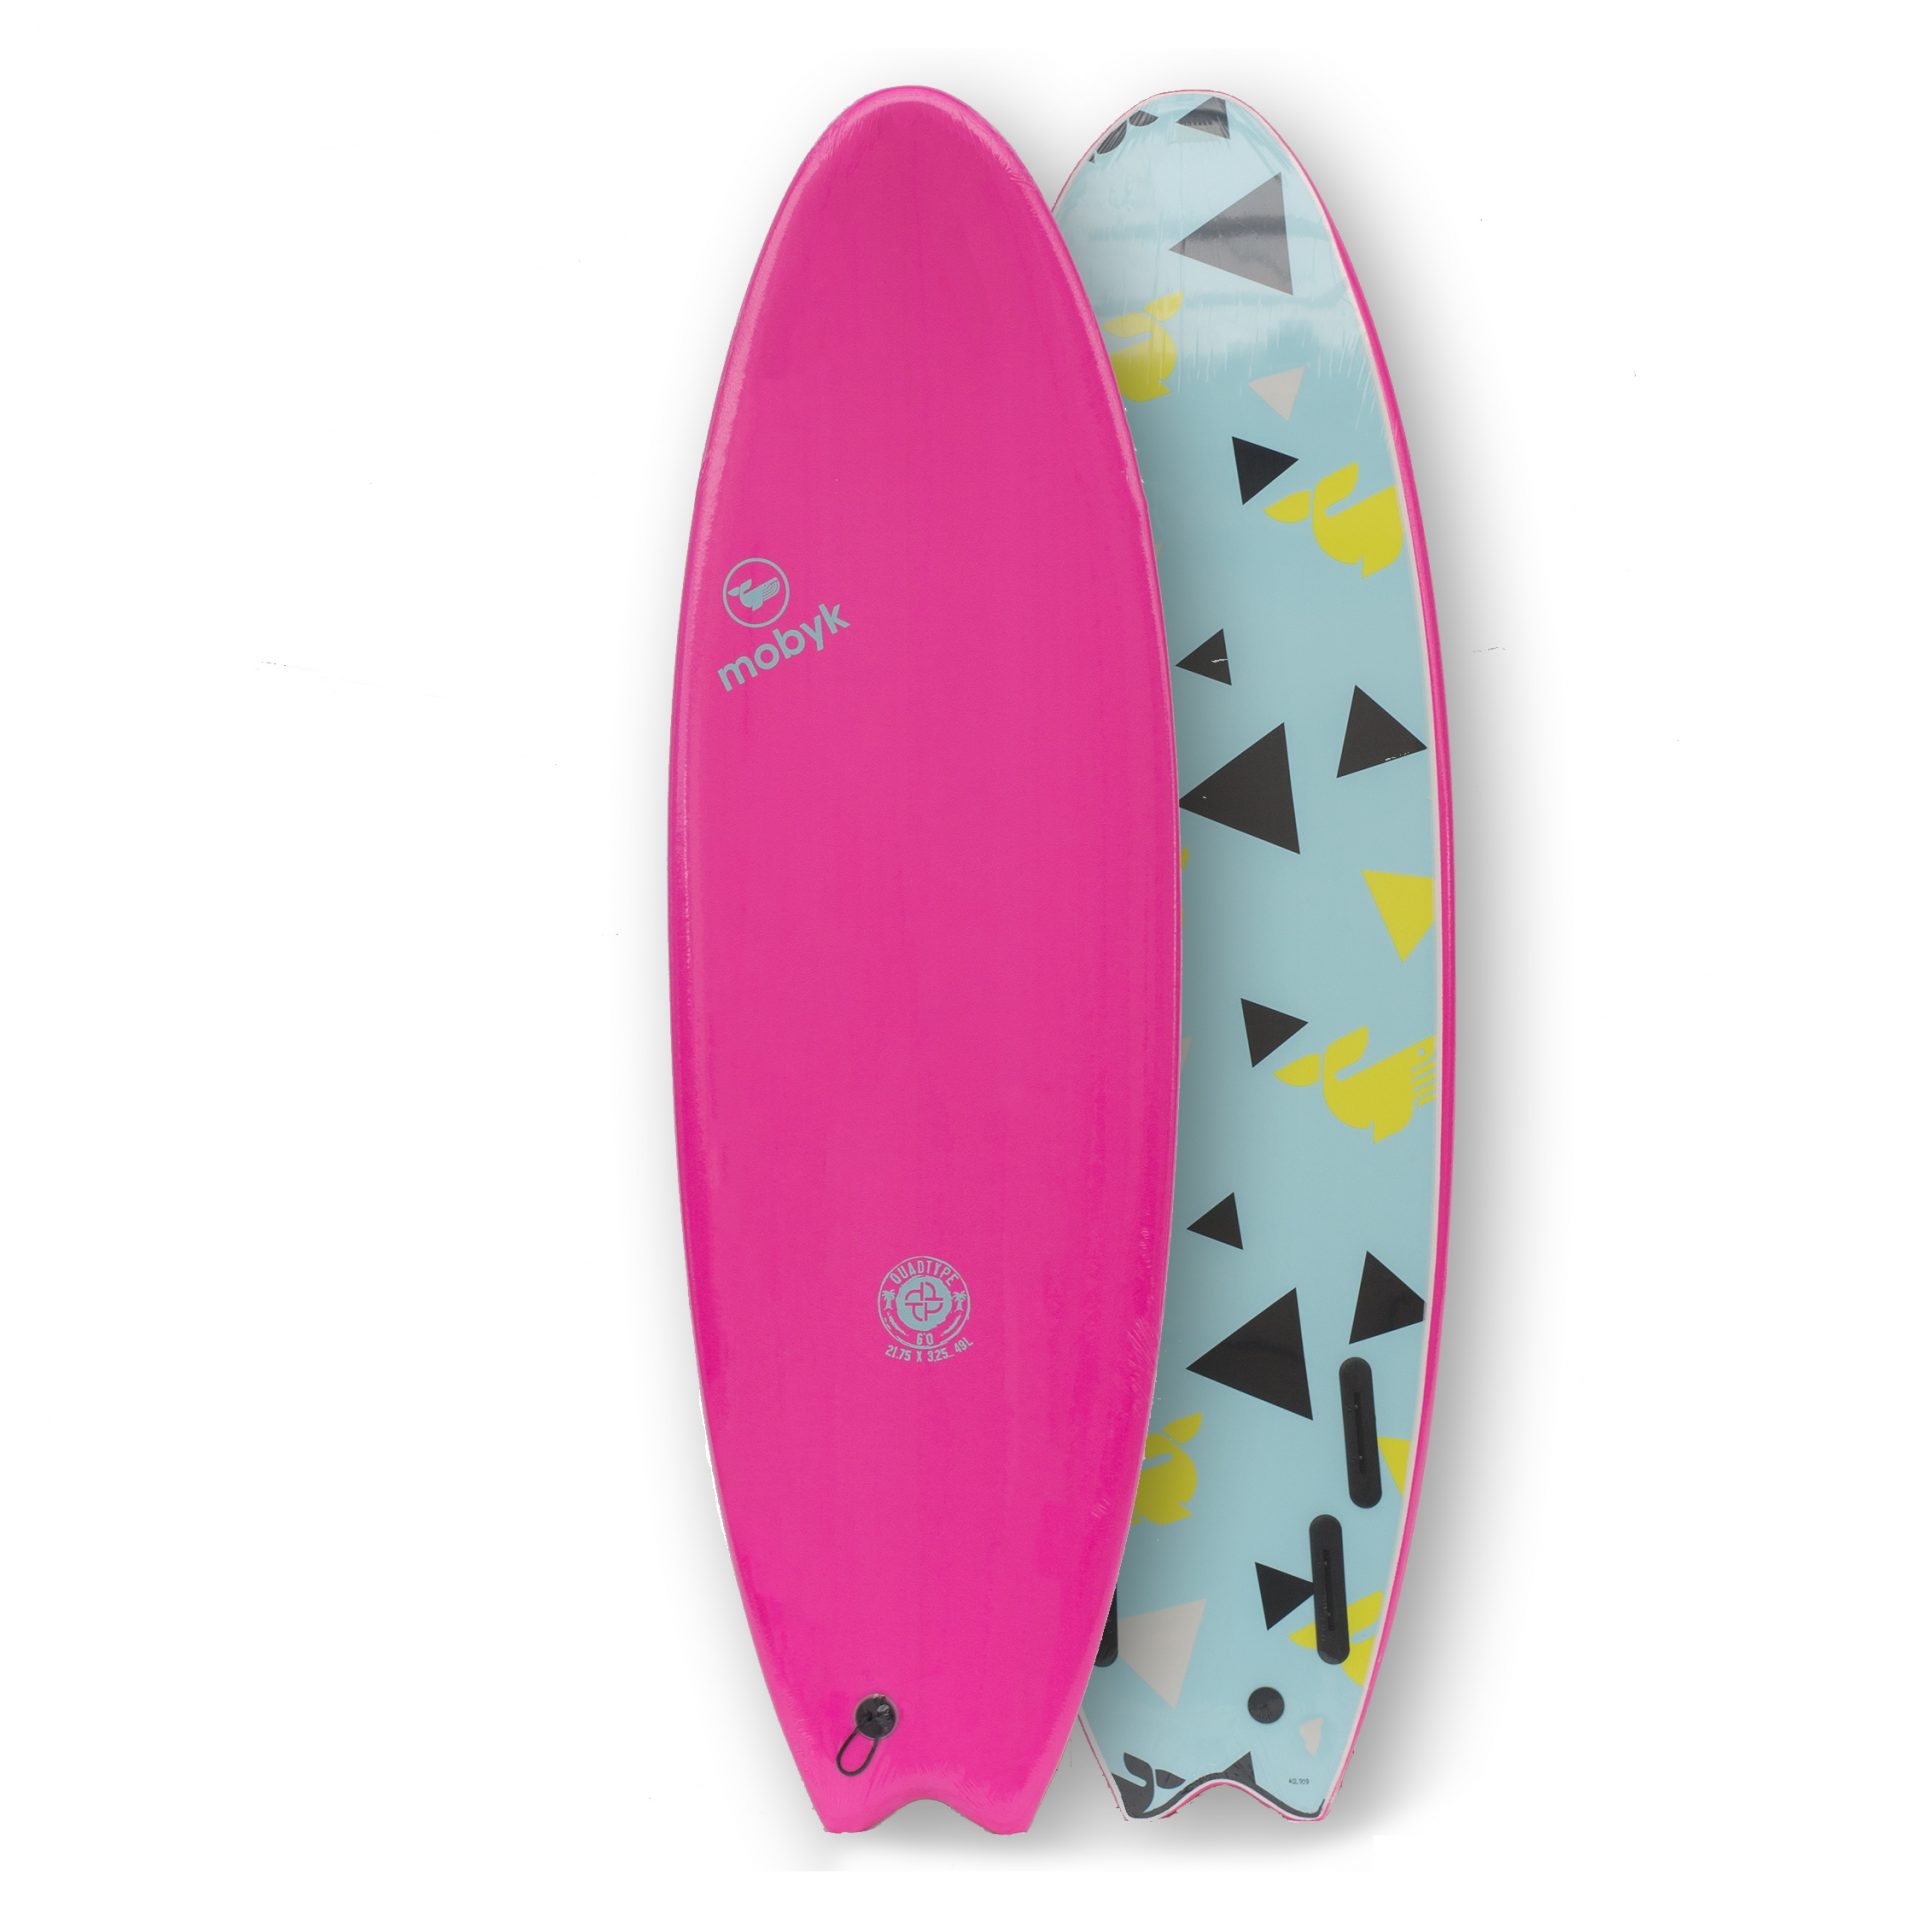 Mobyk surfboards 6´0 pink